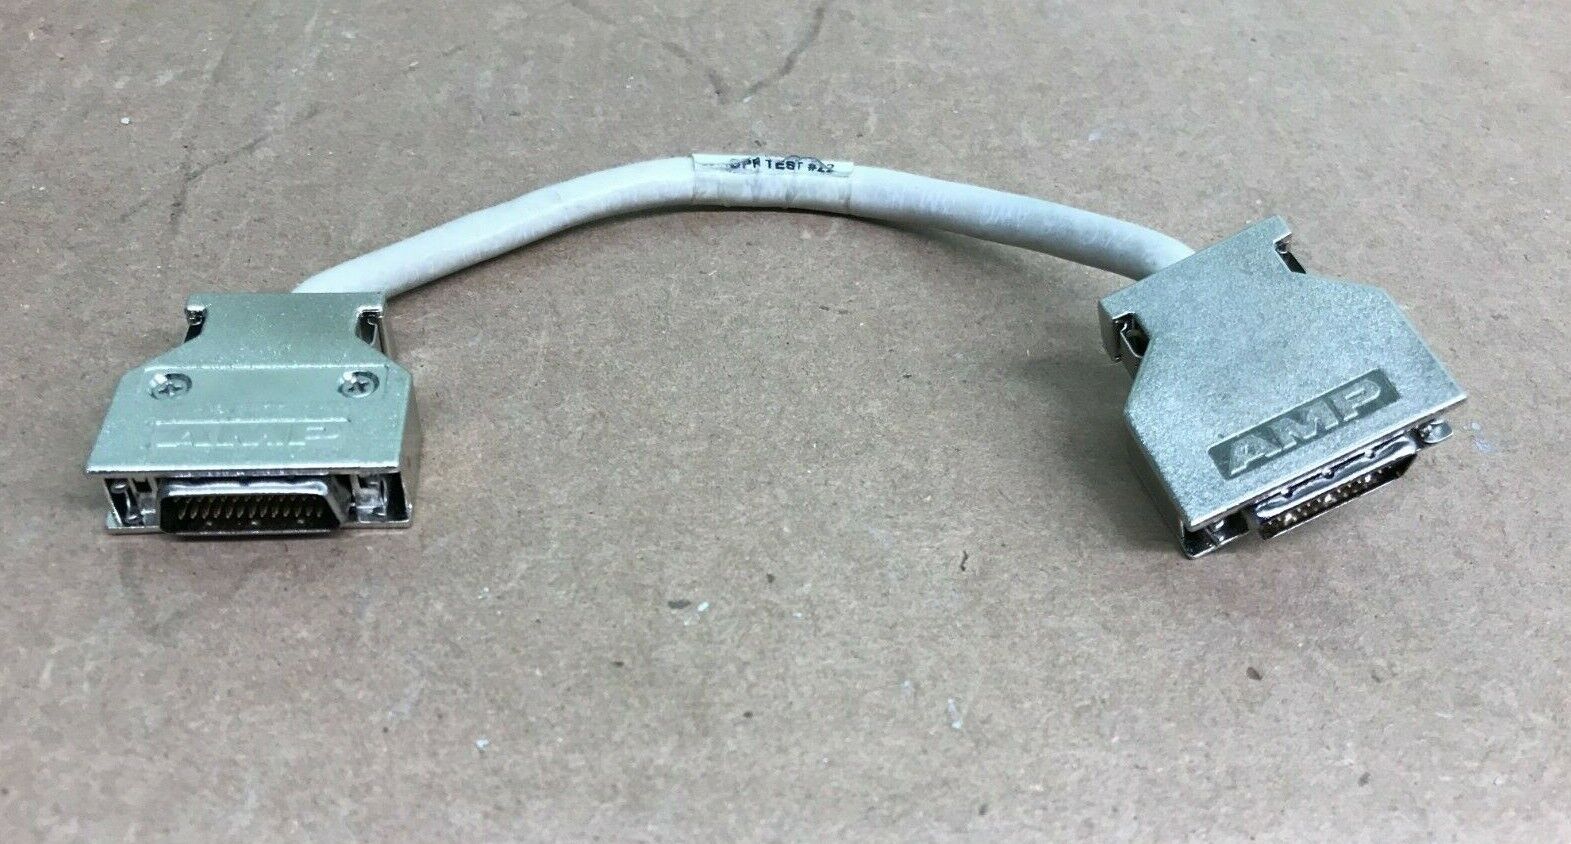  AMP 9557-2494 SCSI TO SCSI 26-PIN MALE CABLE 4